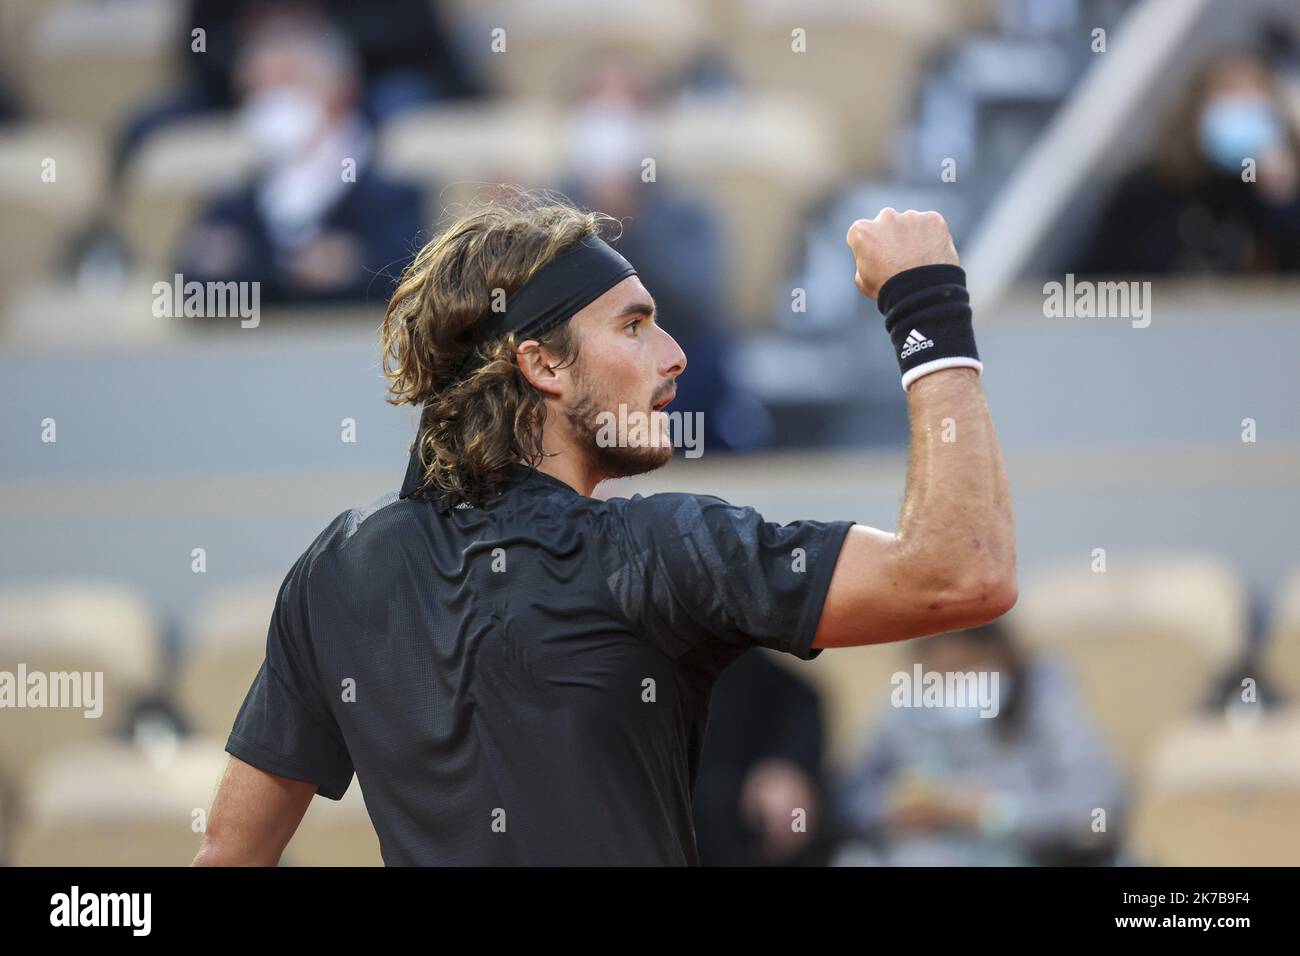 ©Sebastien Muylaert/MAXPPP - Stefanos Tsitsipas of Greece reacts during his Men's Singles quarterfinals match against Andrey Rublev of Russia on day eleven of the 2020 French Open at Roland Garros in Paris, France. 07.10.2020 Stock Photo